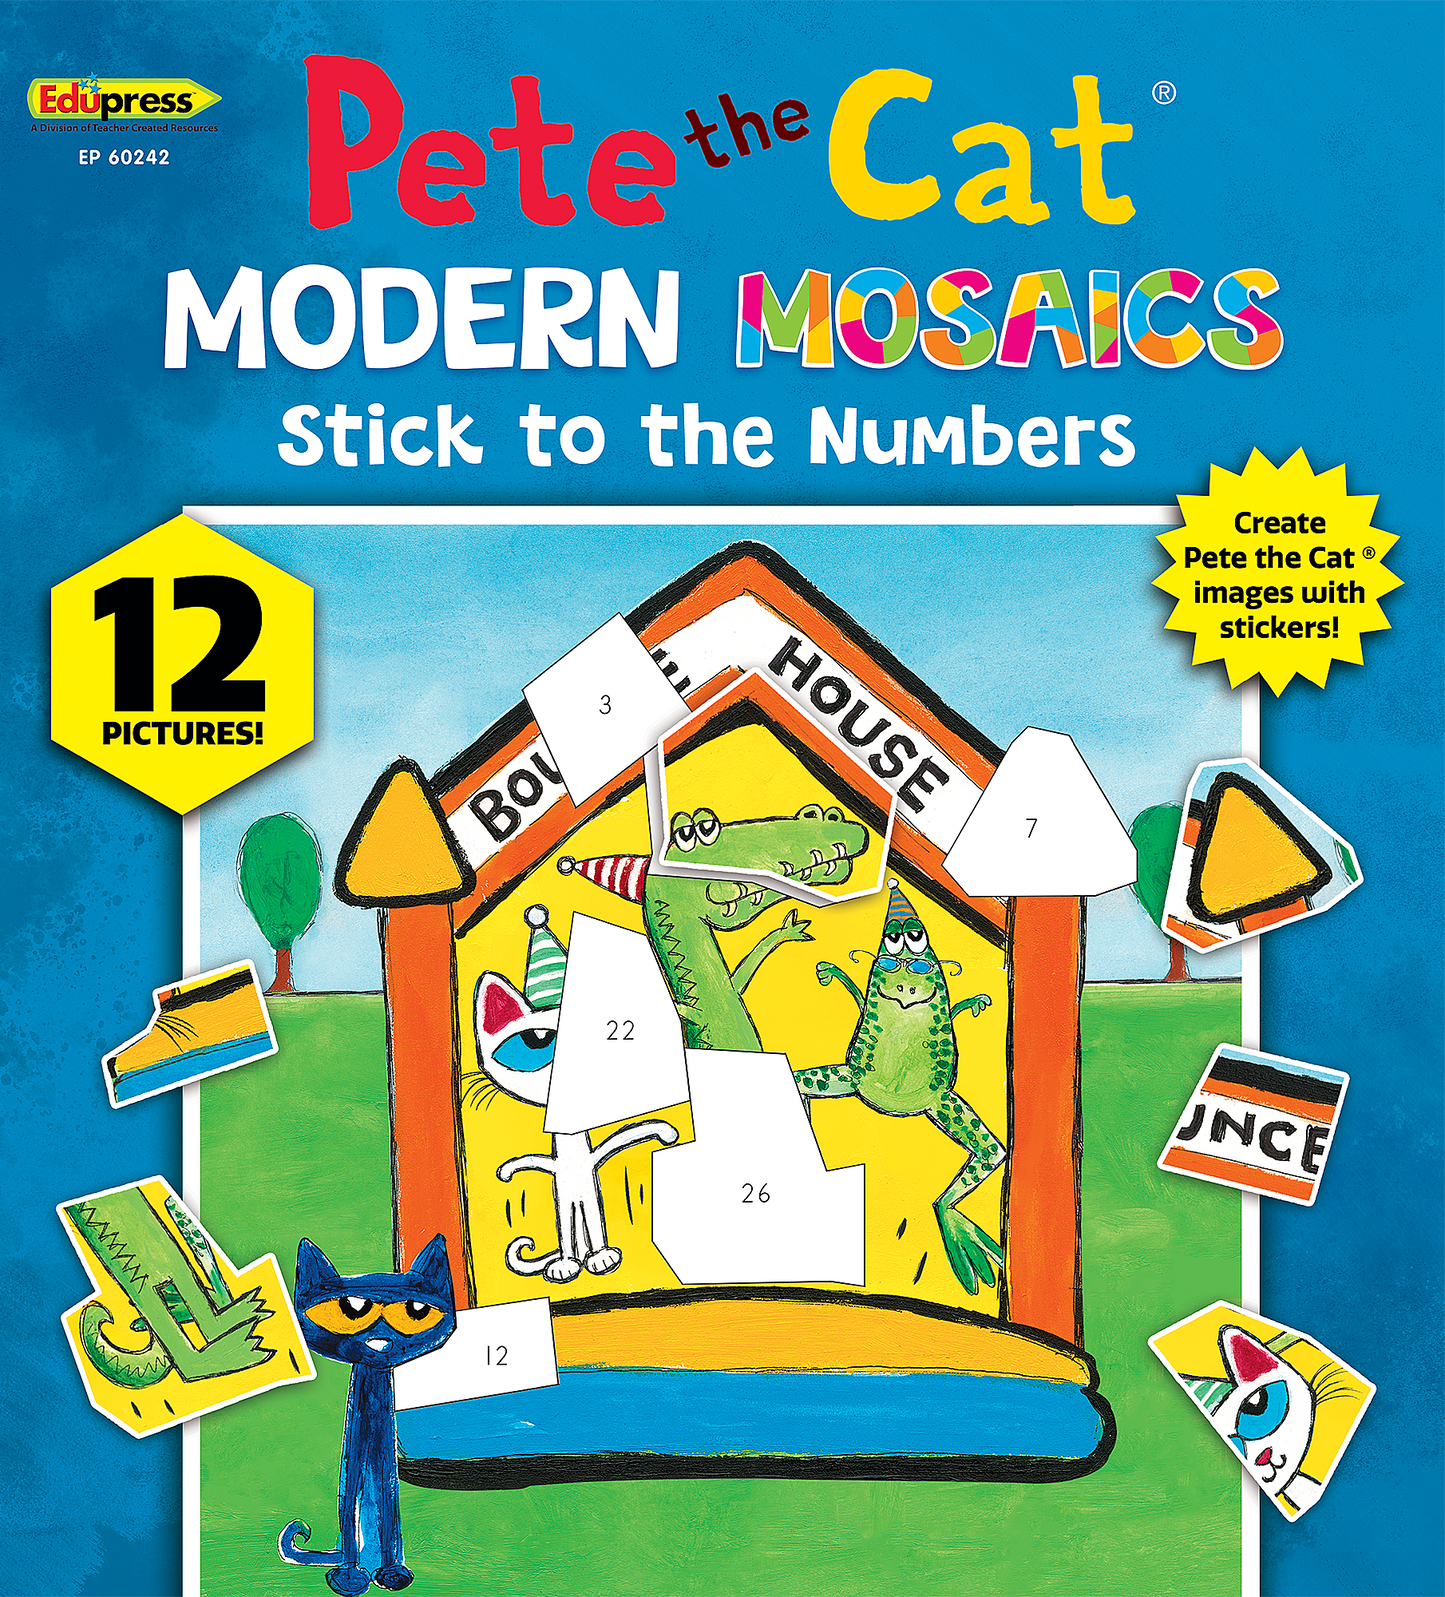 Pete the Cat® Modern Mosaics Stick to the Numbers